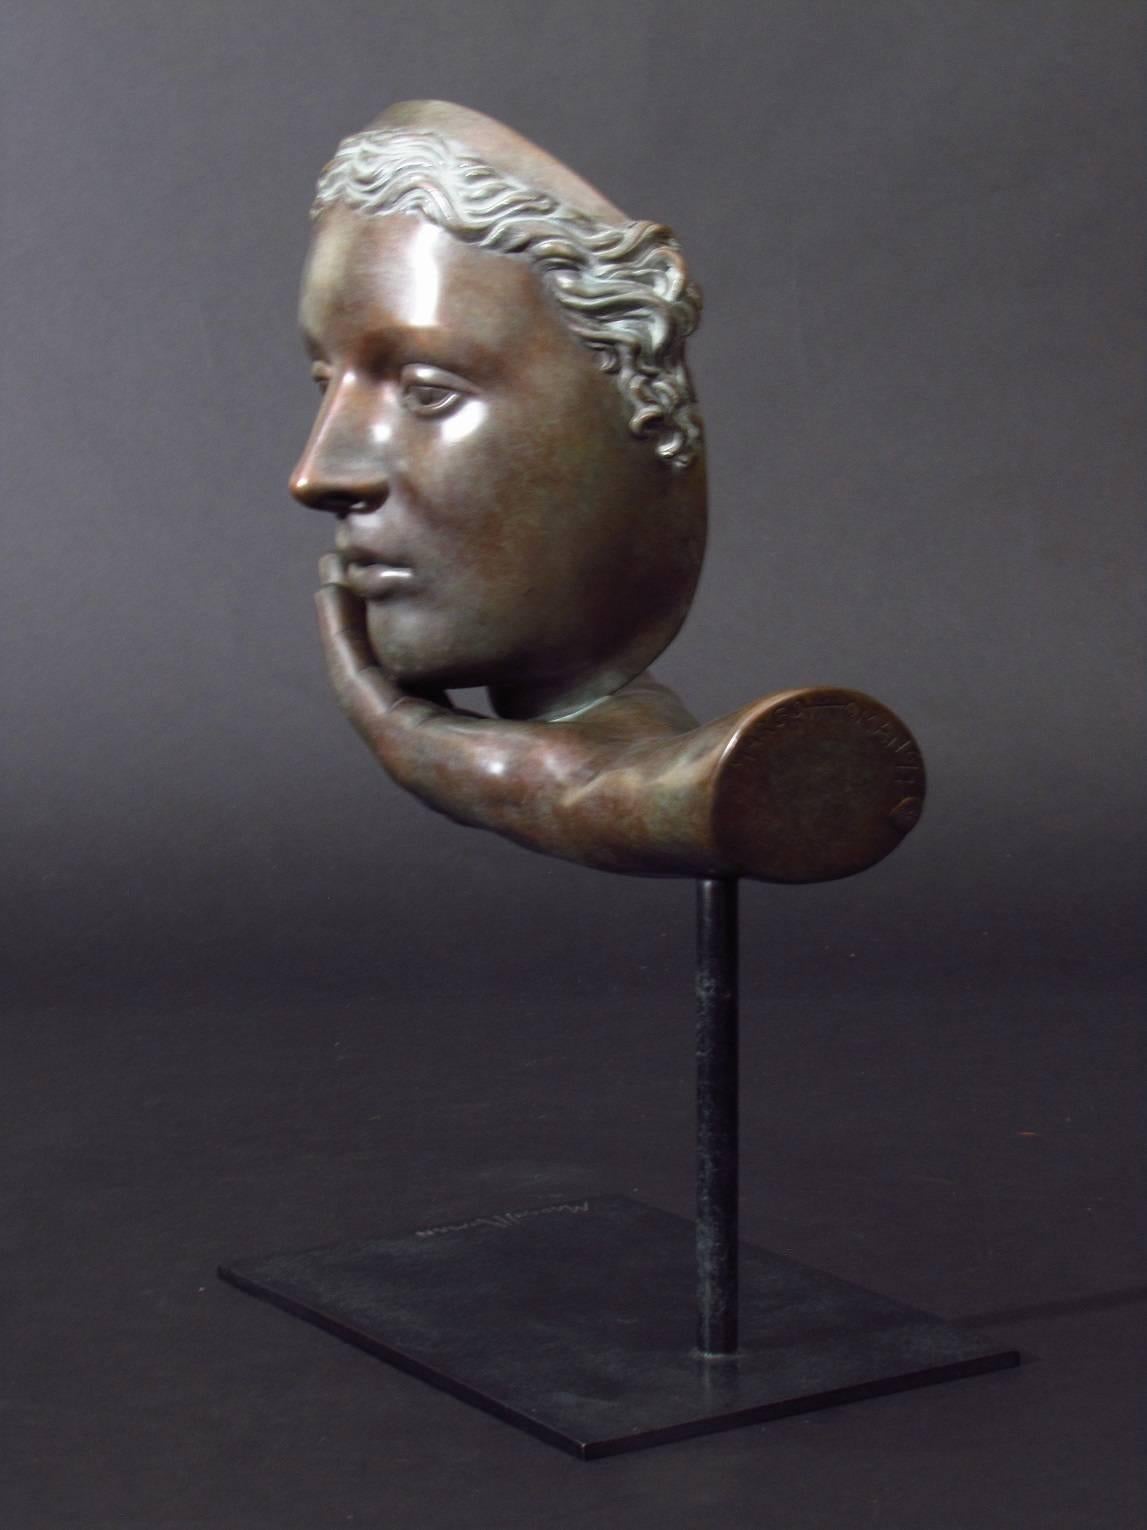 Limited edition contemporary bronze sculpture by Margot Homan.

Slumber   Edition 6 of 7       Signed: M. Homan       Height: 14.5 